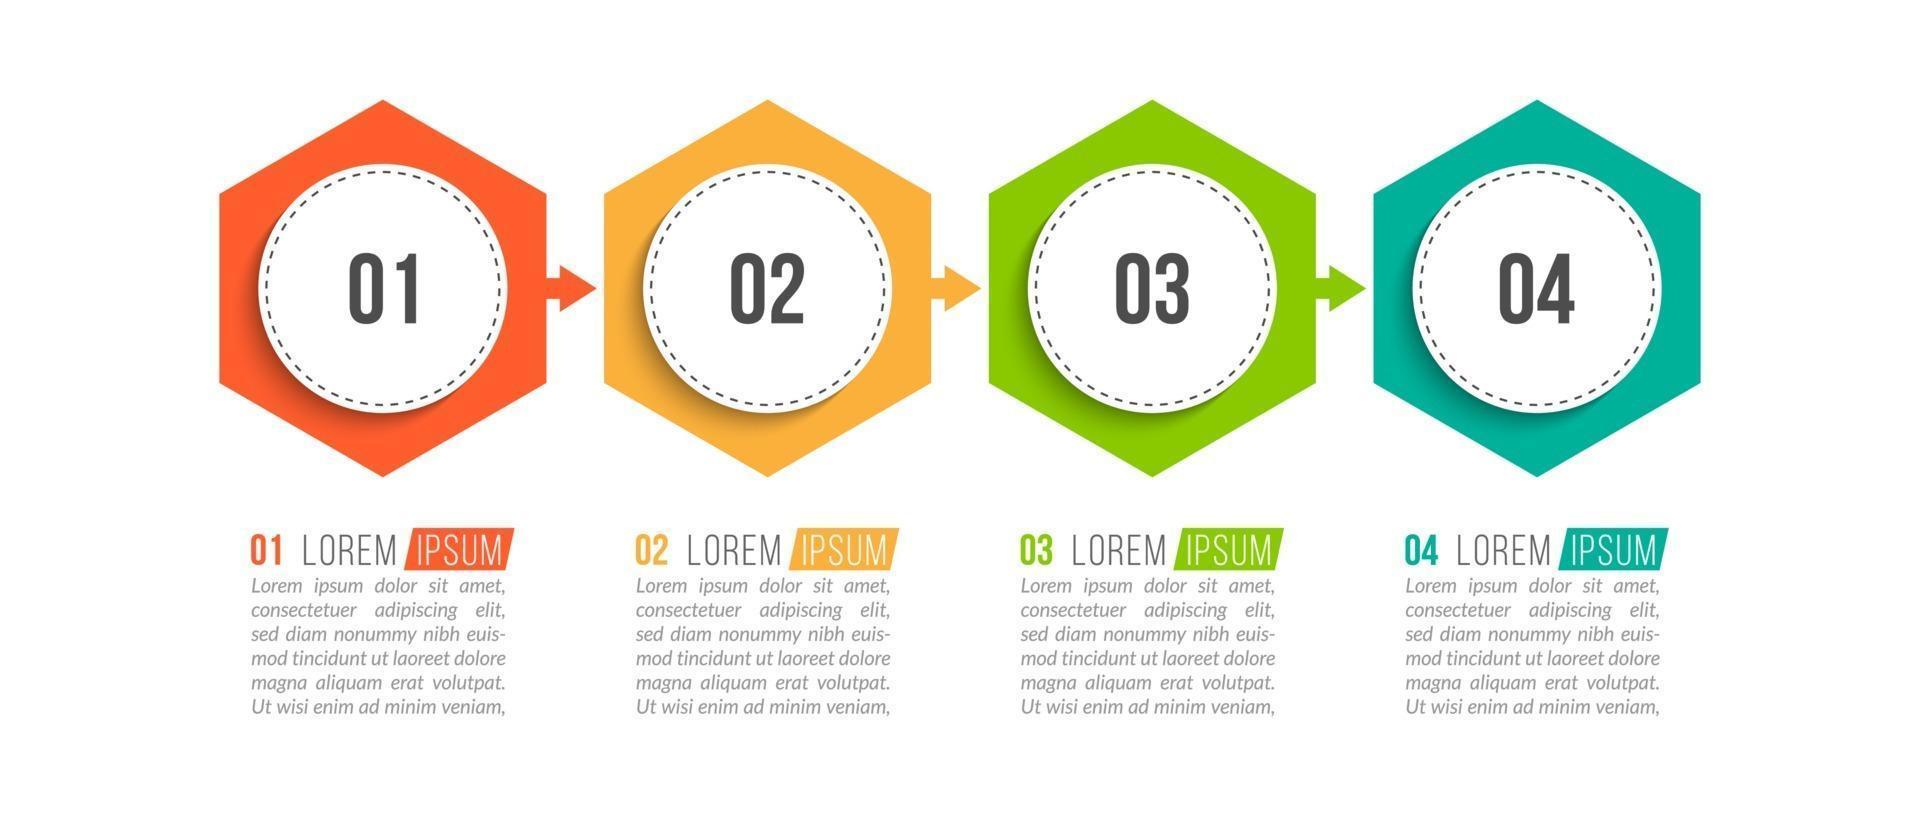 Business Concept with 4 Options or Steps vector